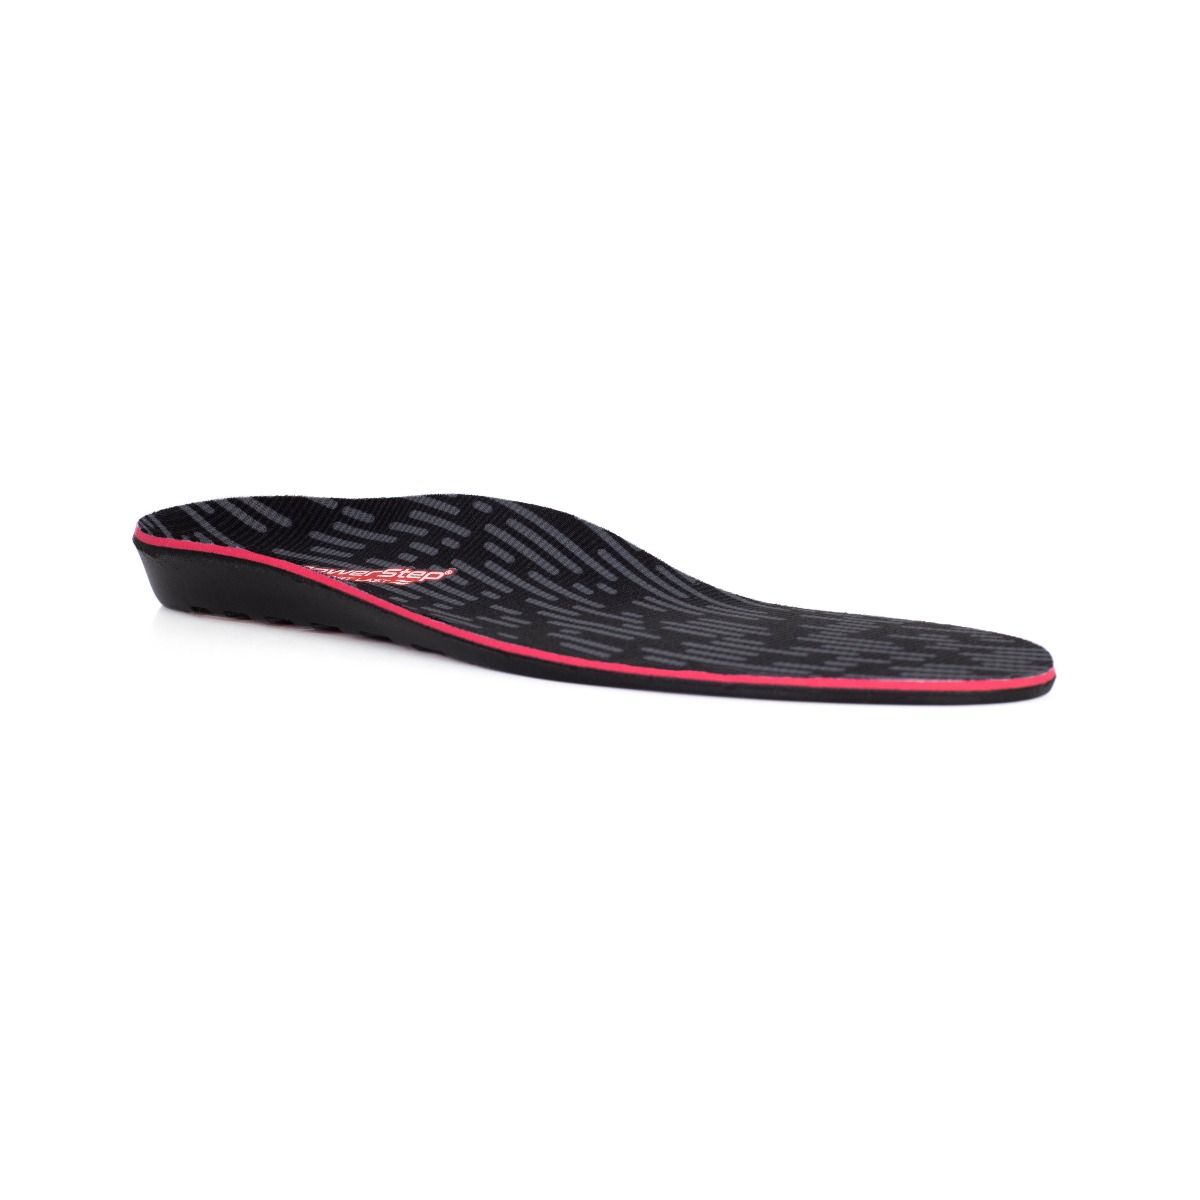 ComfortLast Cushioning Insole by Powerstep